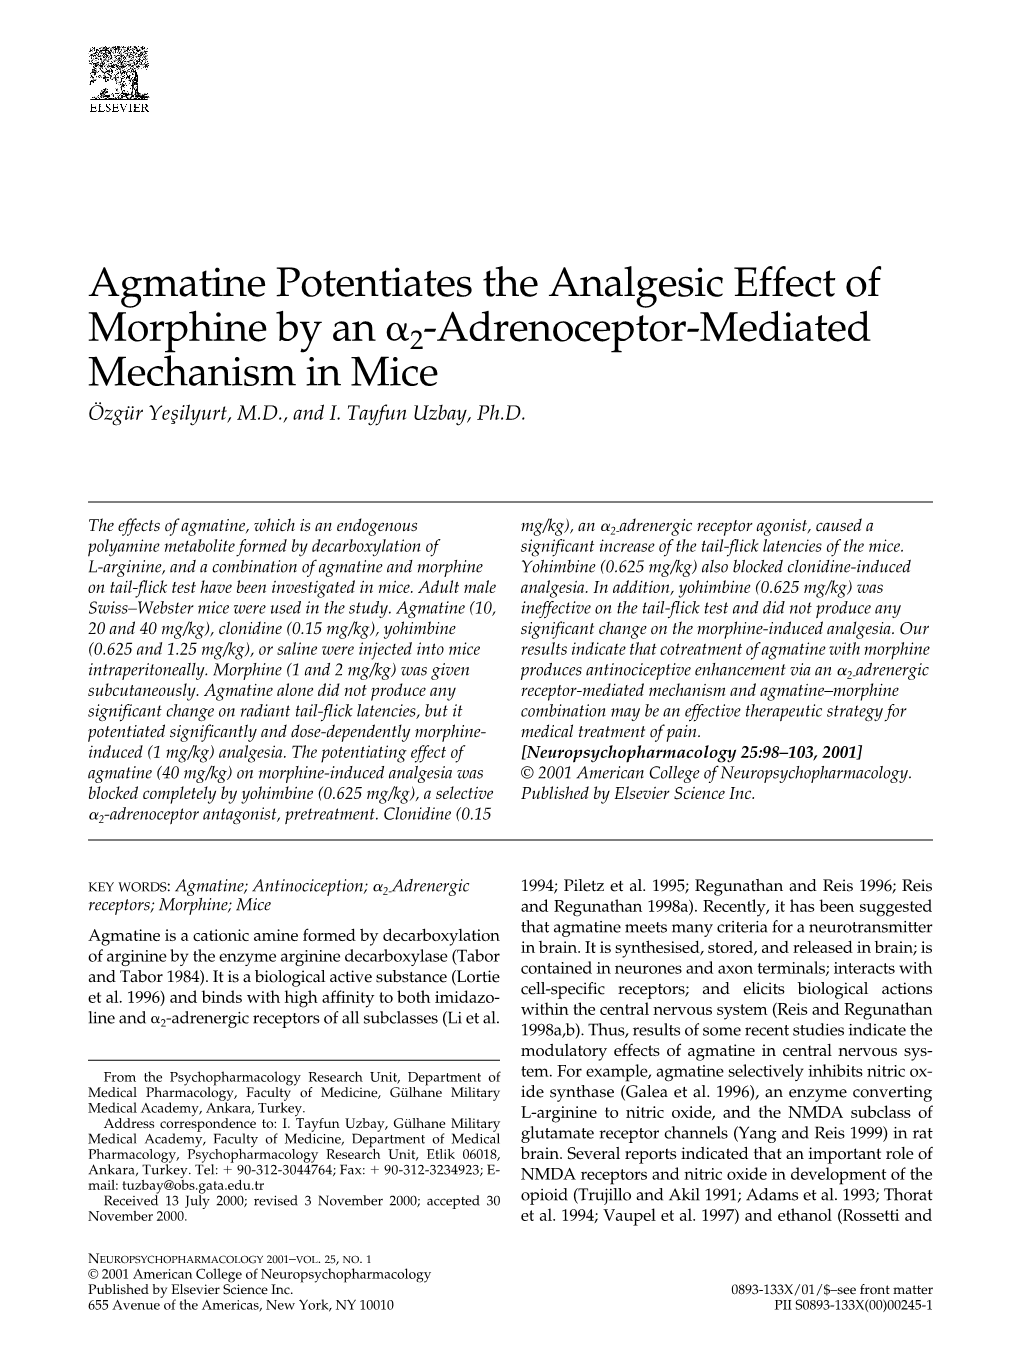 Agmatine Potentiates the Analgesic Effect of Morphine by an 2